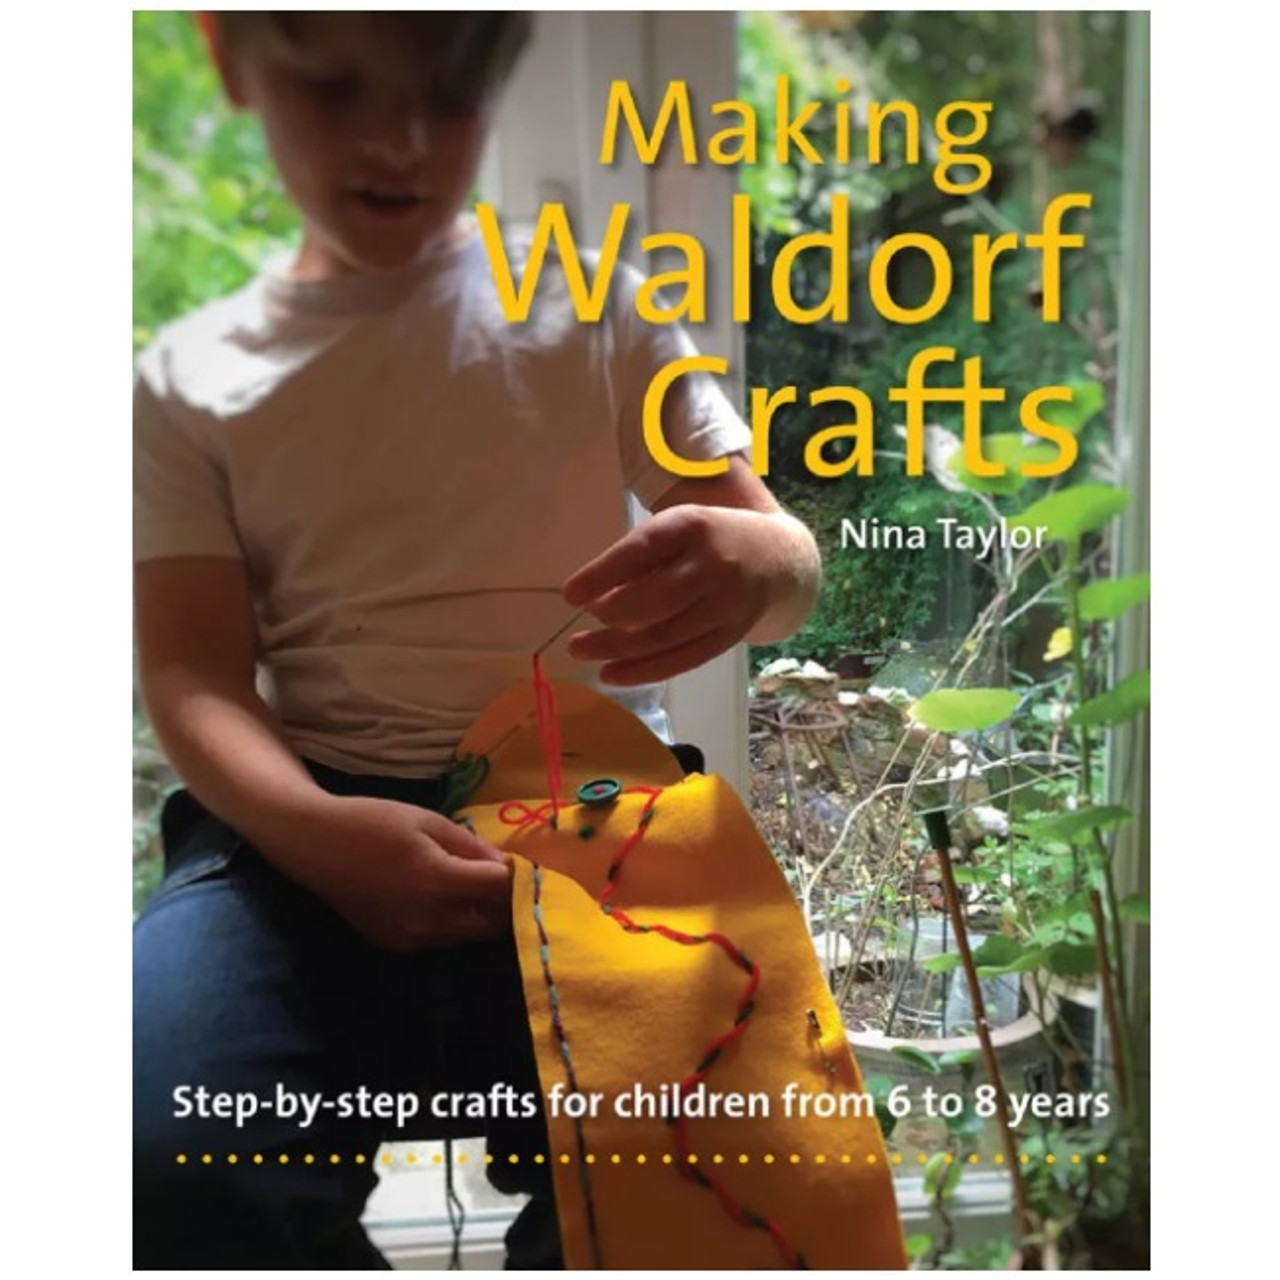 Craft Thread for Waldorf Doll Making - A Child's Dream